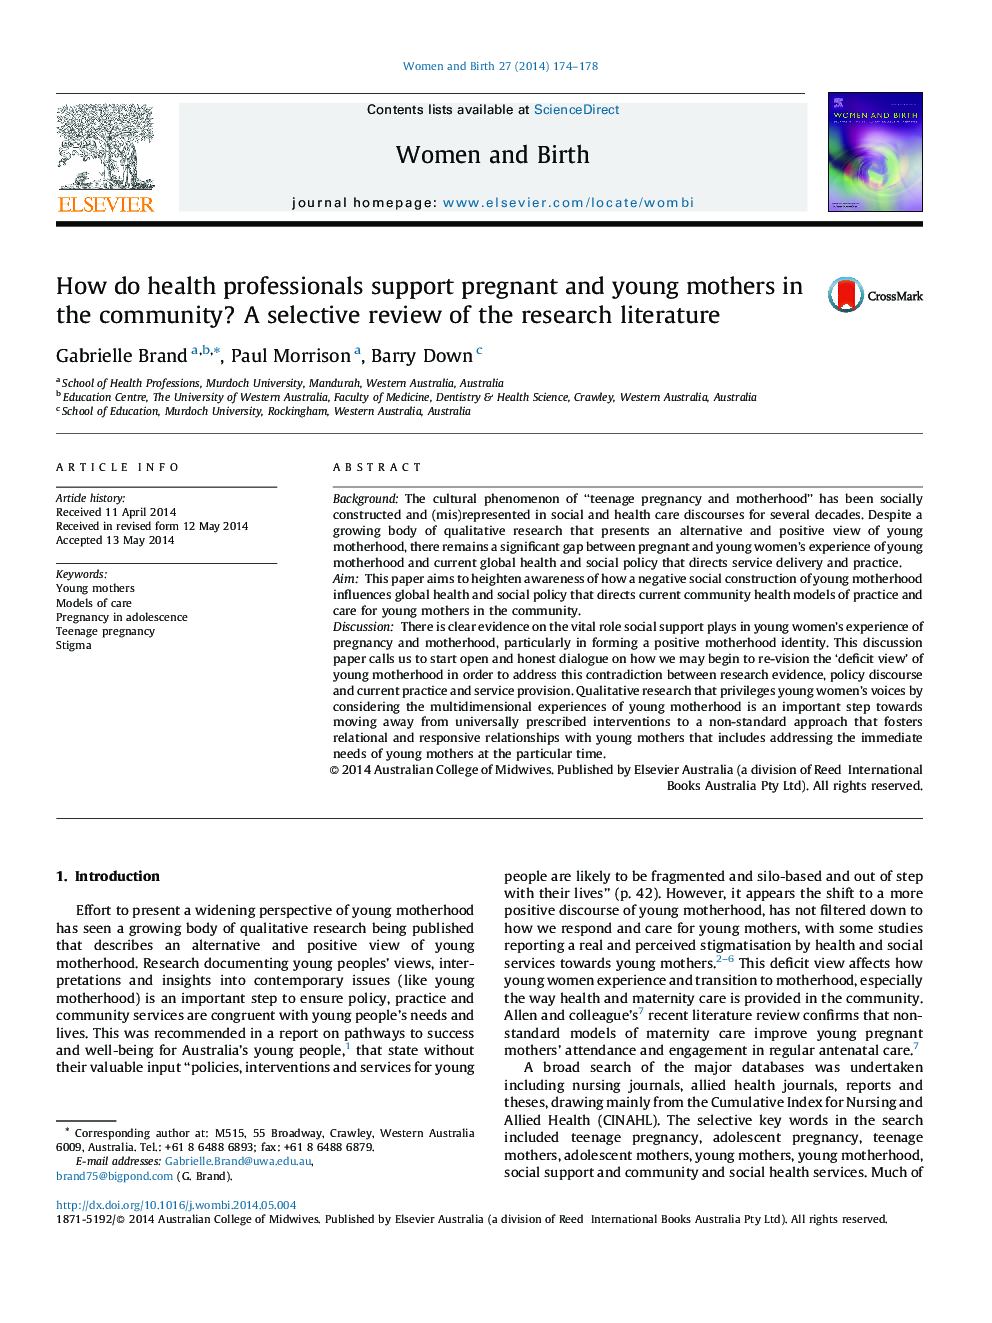 How do health professionals support pregnant and young mothers in the community? A selective review of the research literature